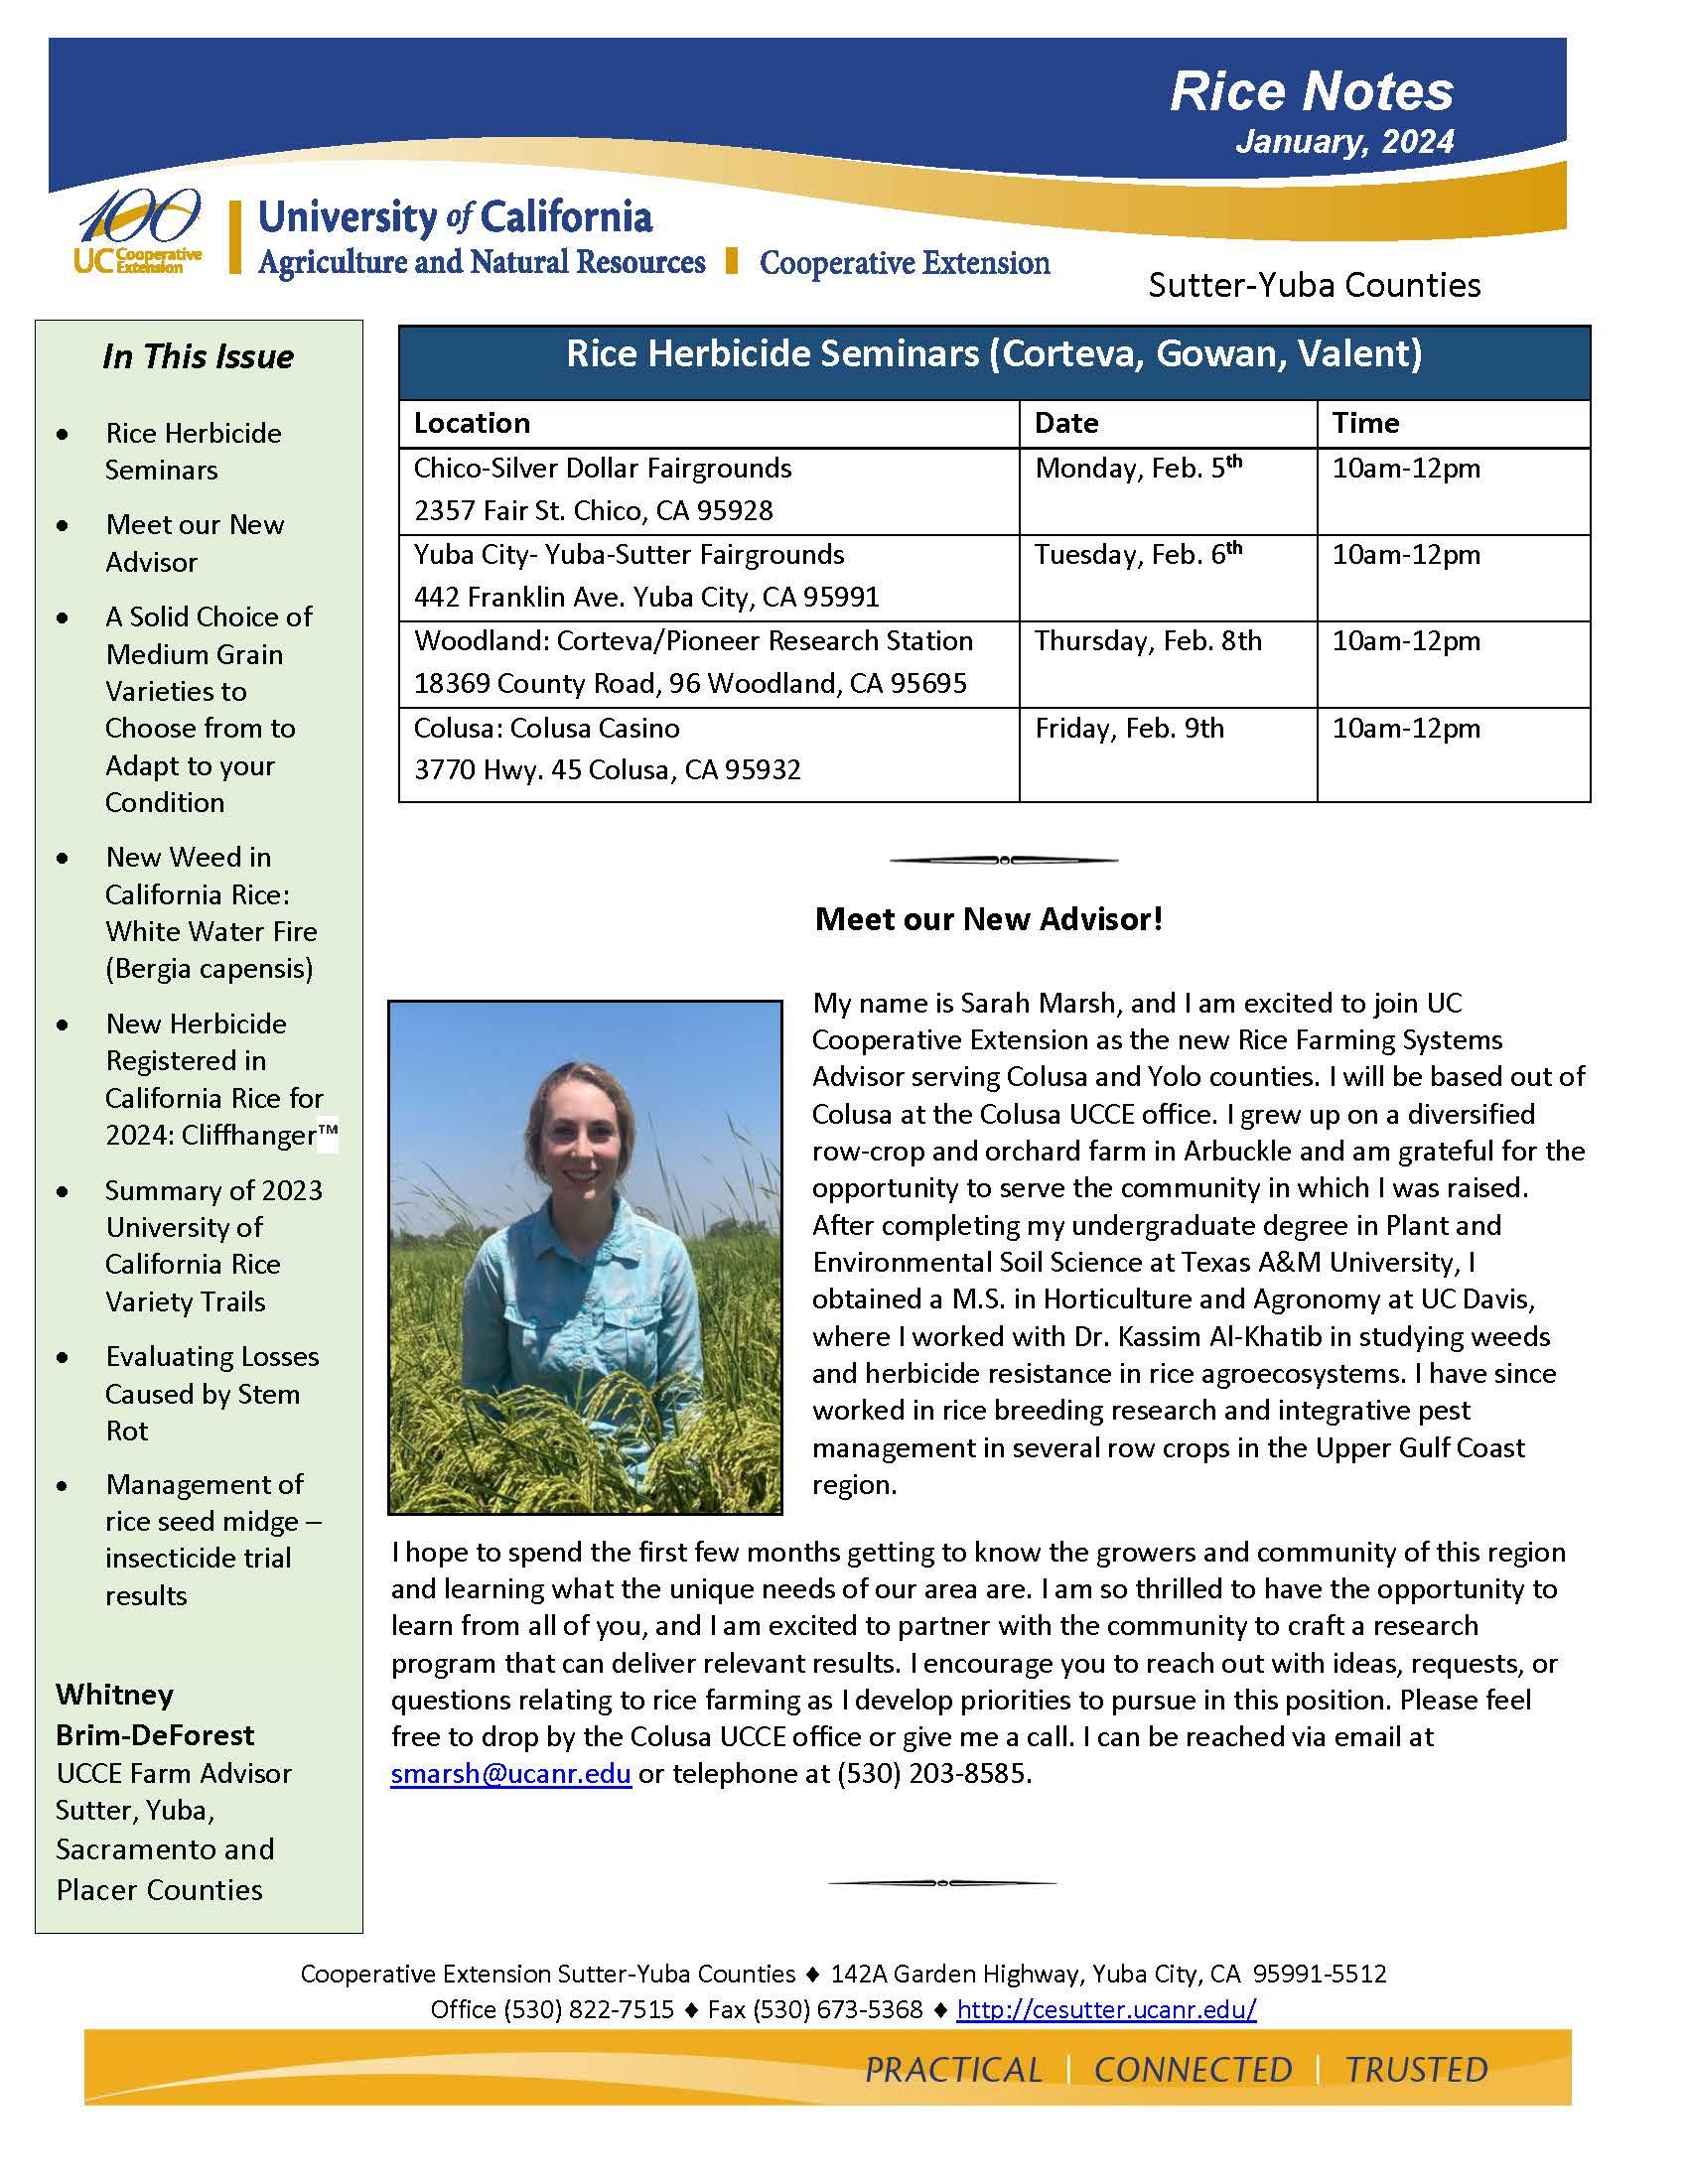 FinalRice Newsletter-Jauary 2024_Page_1